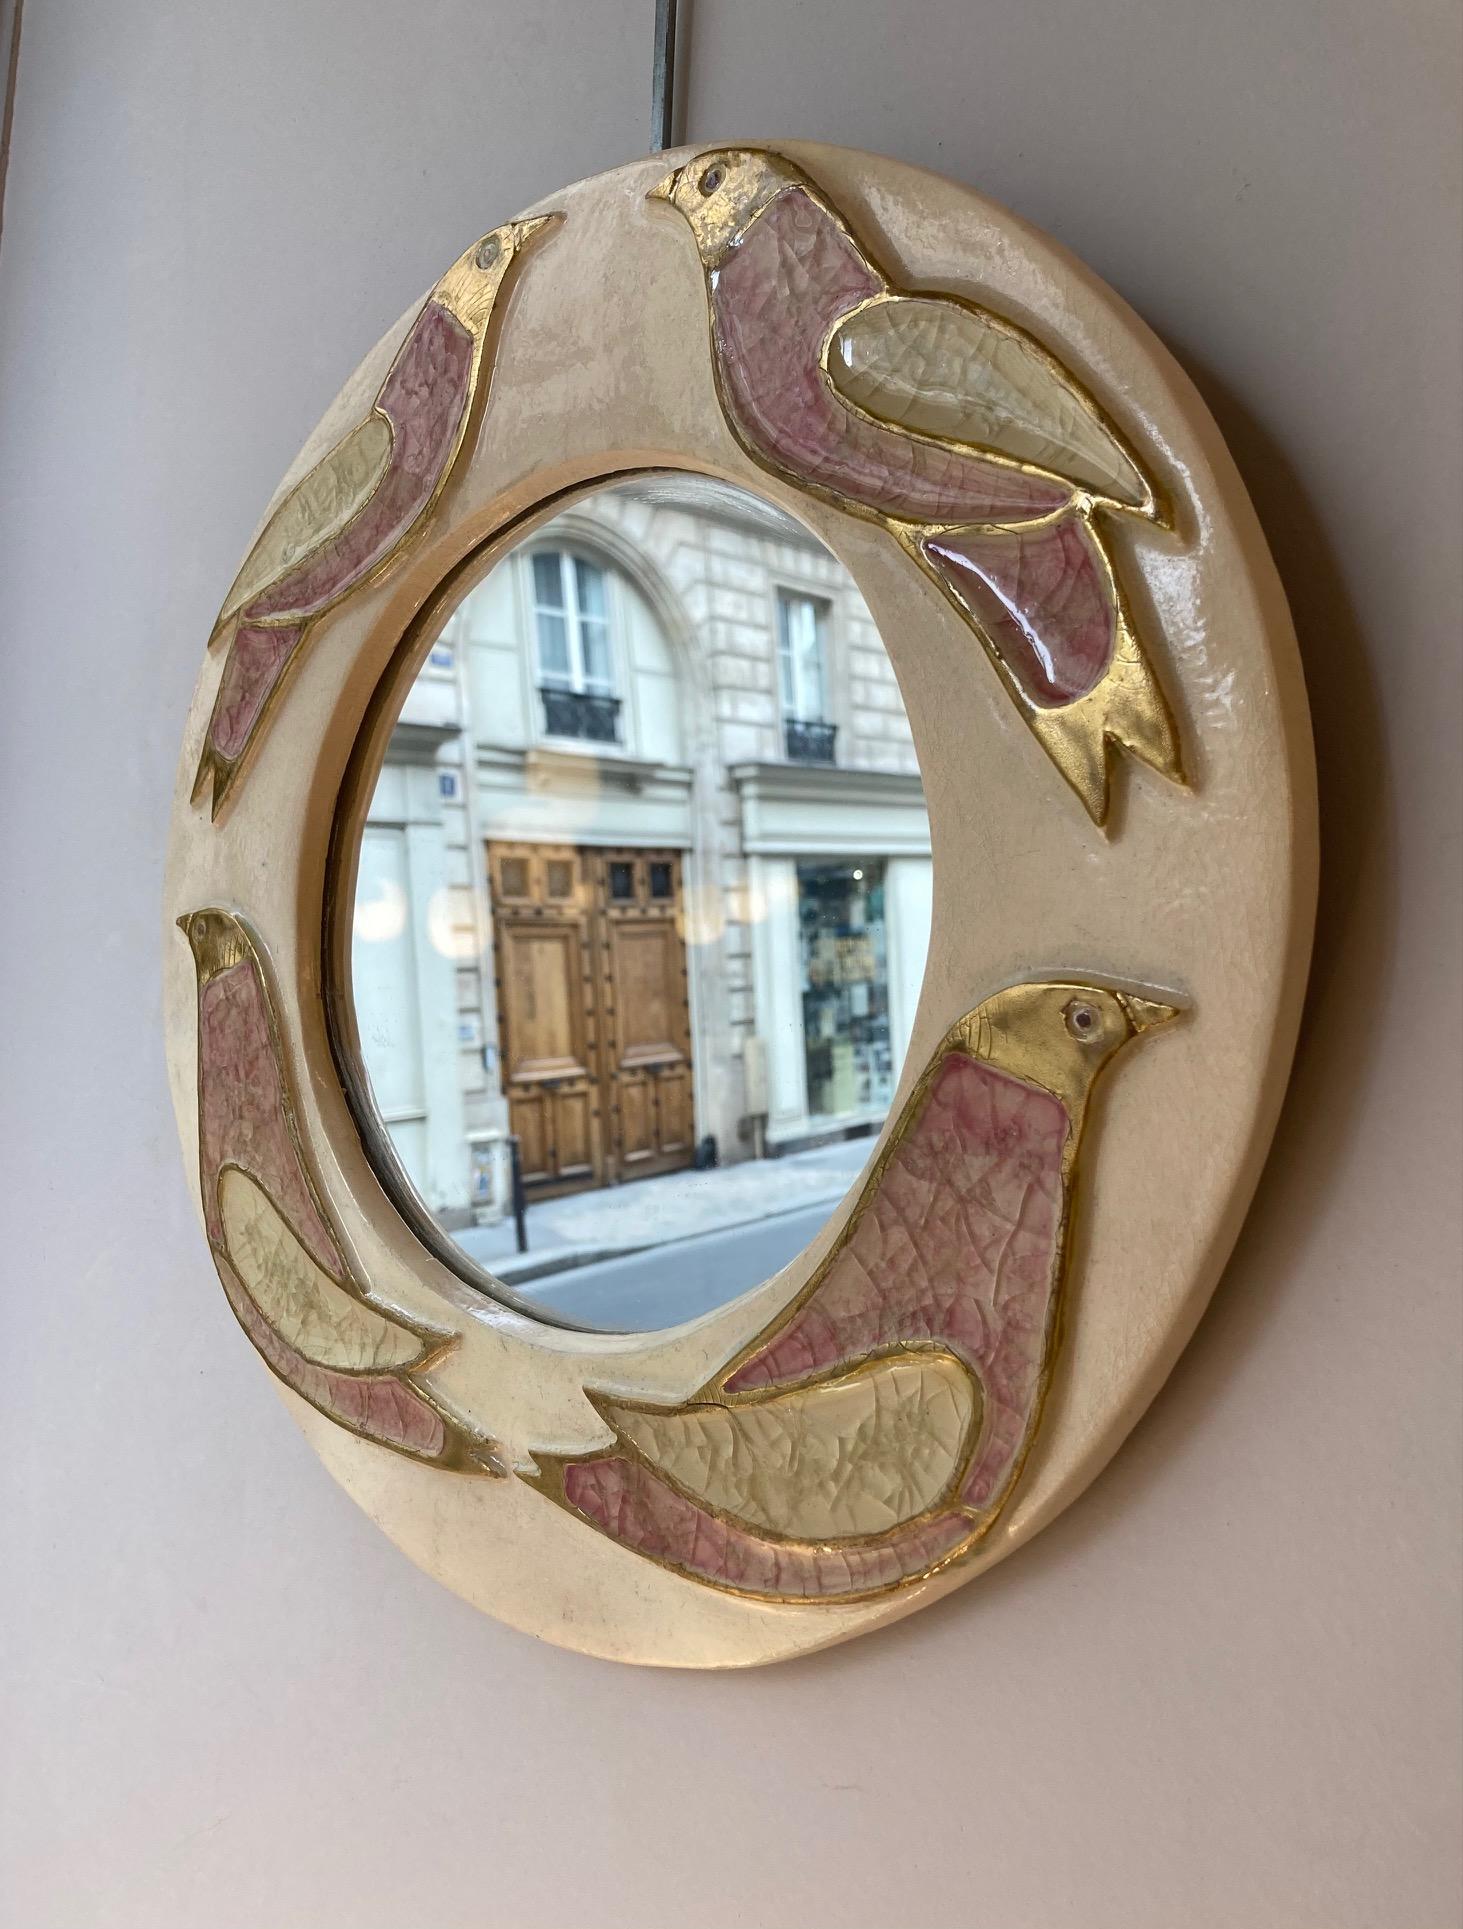 A round ceramic wall mirror, 2 birds facing each other and 2 others being back to back.
Enameled in shades of ivory, light pink and gold.
Original green felt at the back, in very good condition.
Mithé Espelt (born 1923)
Lunel, south of